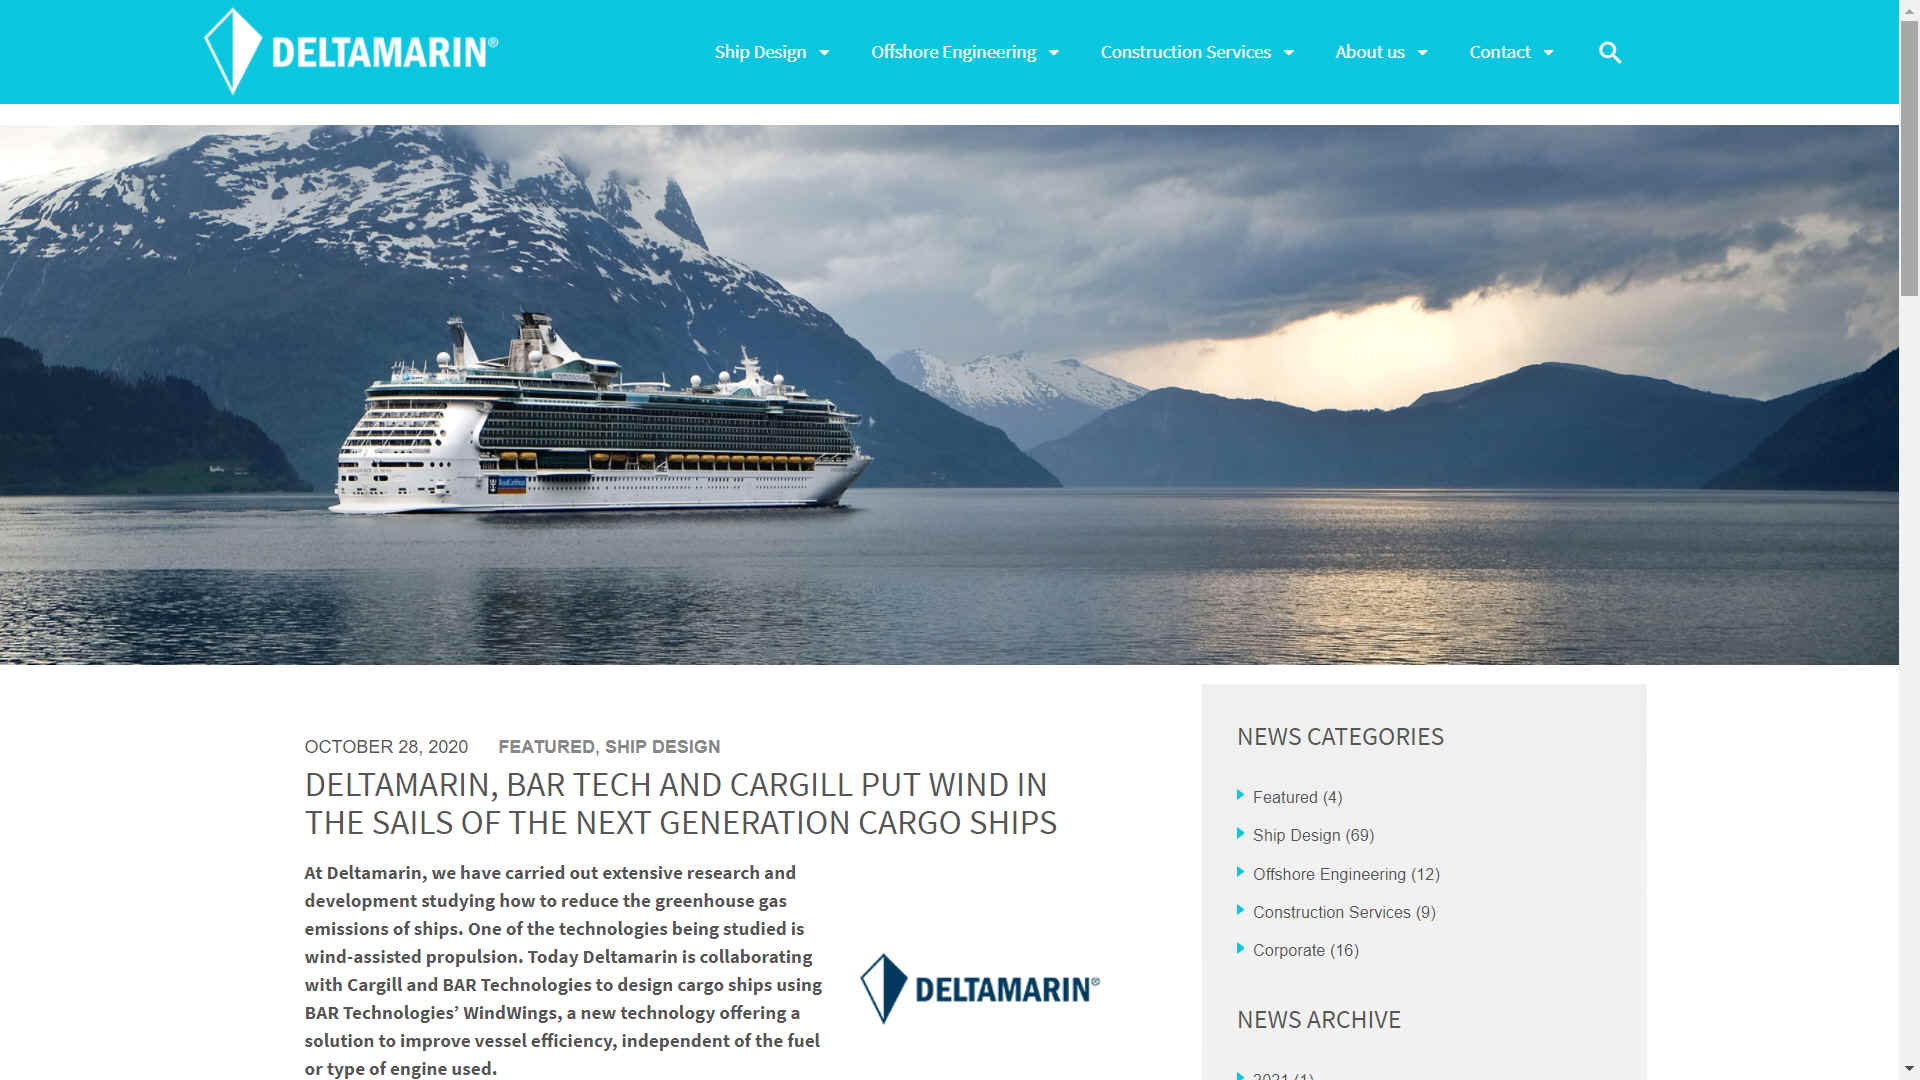 Deltamarin team up with BAR Technologies and Cargill for wind wing assisted cargo ships